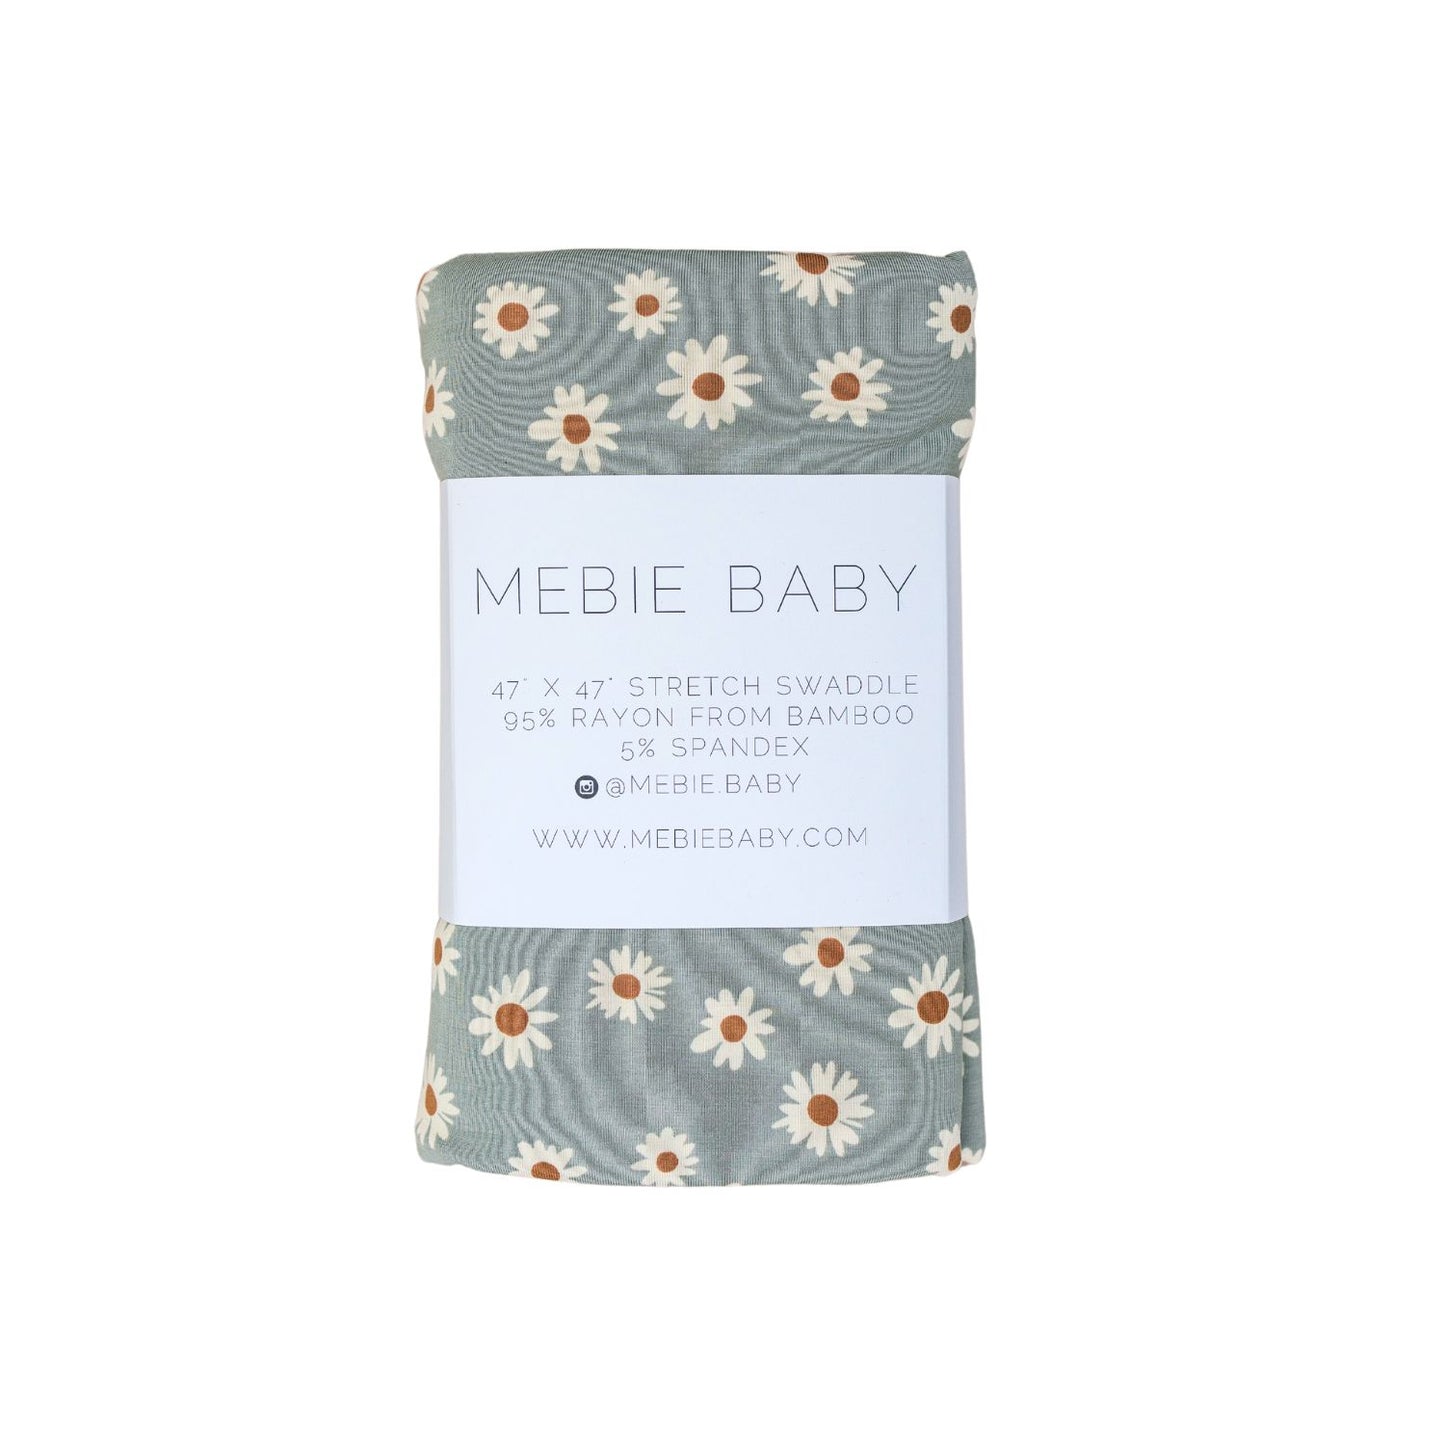 Mebie Baby Bamboo Stretch Swaddle Blanket - Light Green Daisy